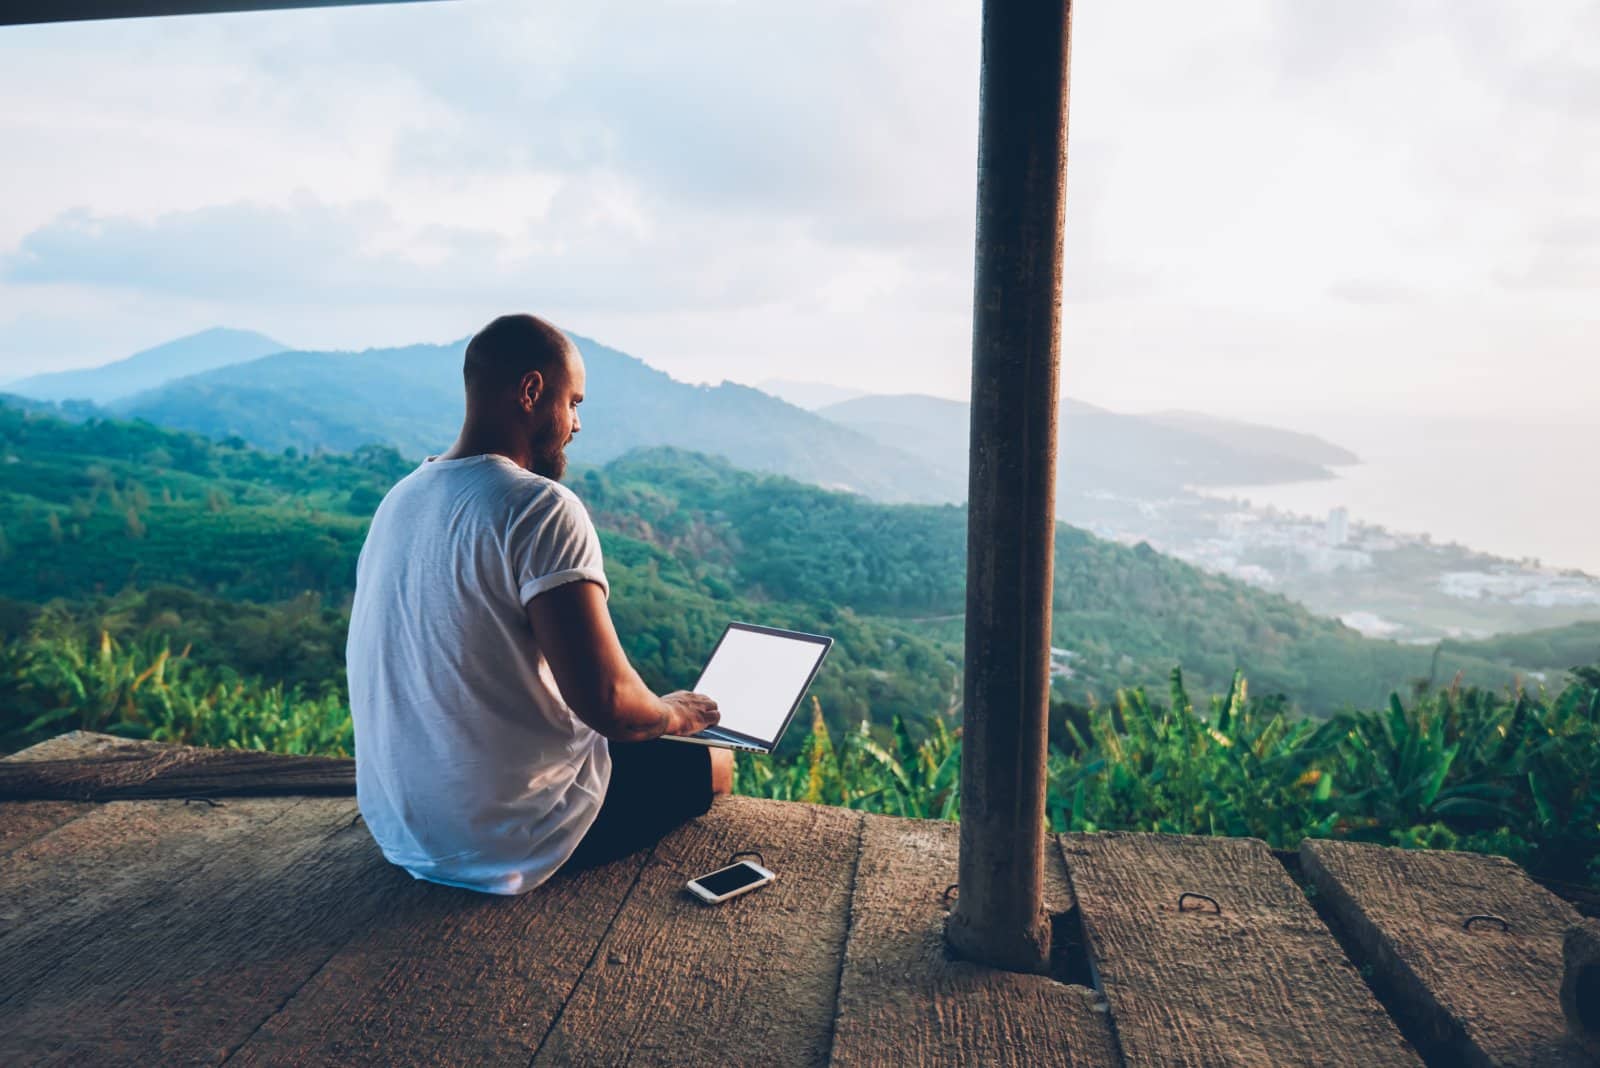 <p class="wp-caption-text">Image Credit: Shutterstock / GaudiLab</p>  <p><span>As remote work becomes more prevalent, countries will introduce digital nomad visas, allowing travelers to live and work in new destinations for extended periods.</span></p>